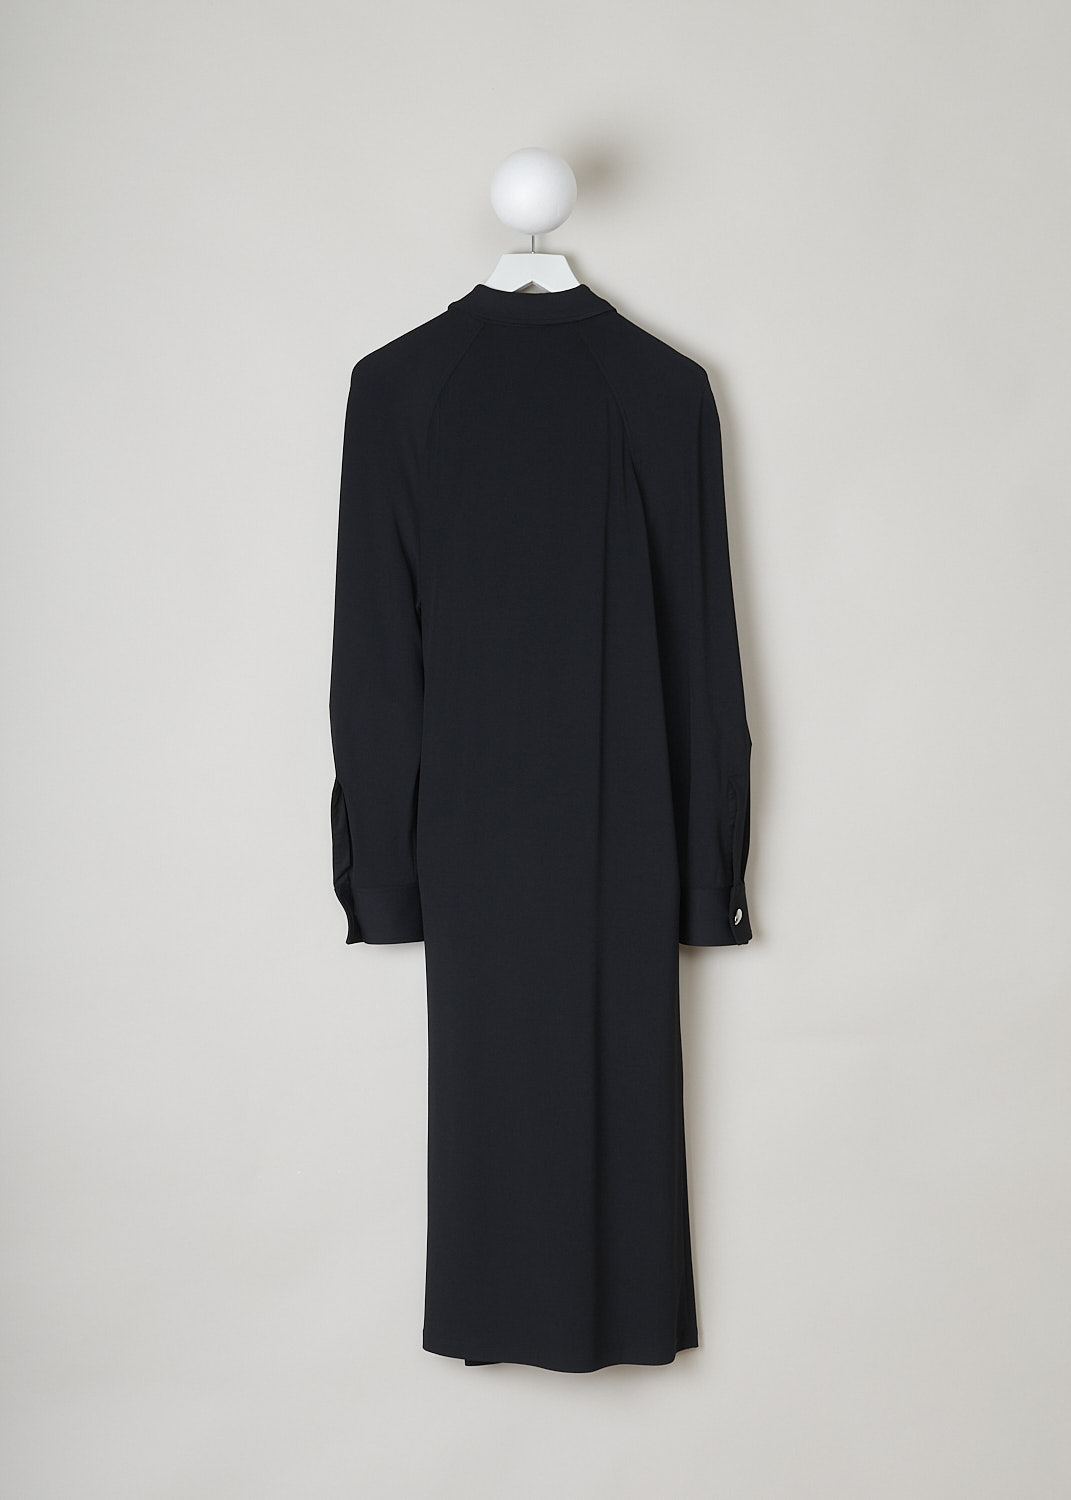 Bottega Veneta, Black blouse dress, 609304_VKIJ0_1000_crêpe_jersey, black, back, Black dress with maxi length and a crêpe de chine fabric. Featuring a blouse dress model, a pointed collar that leads onto the long cuffed sleeves with a single button. Horseshoe shaped embellishment decorates the front and causes draping pleats which suit this model brilliantly. Furthermore this model comes with a front fastening option being buttons. 